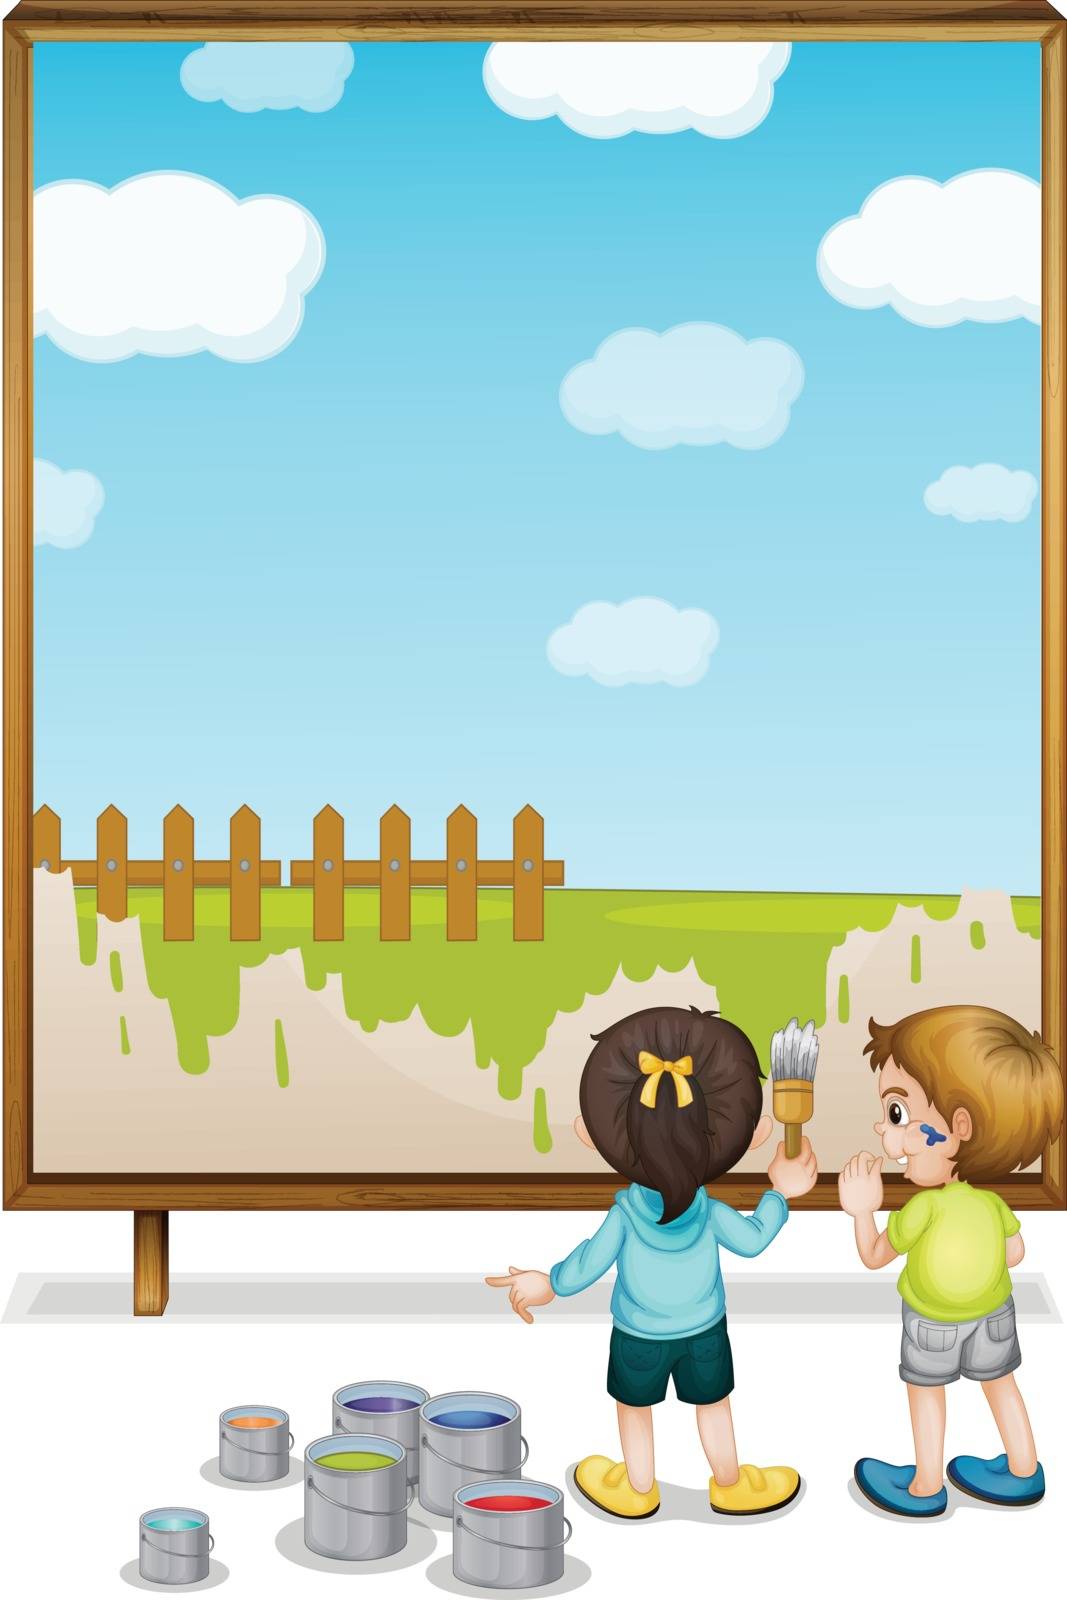 Illustration of kids painting a banner